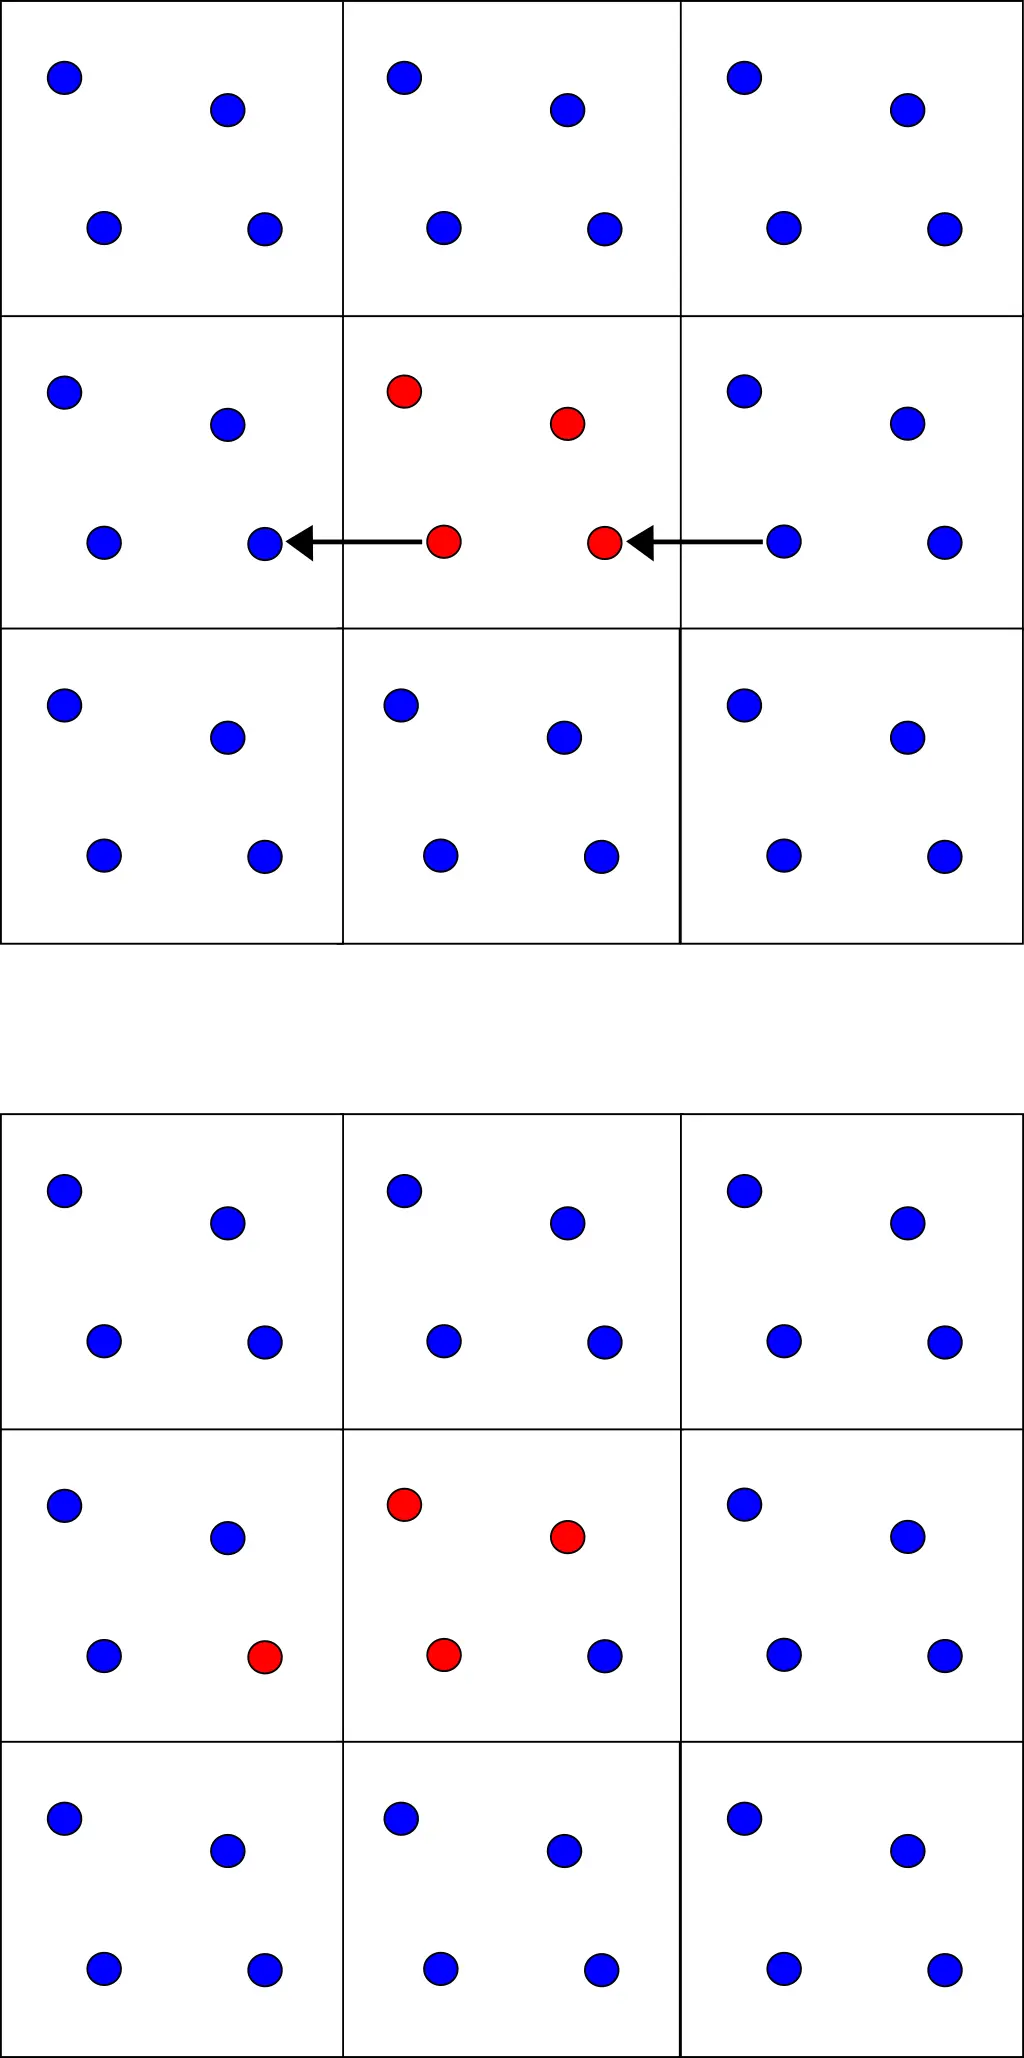 Particles move outside of the box and another one enters from the opposite side